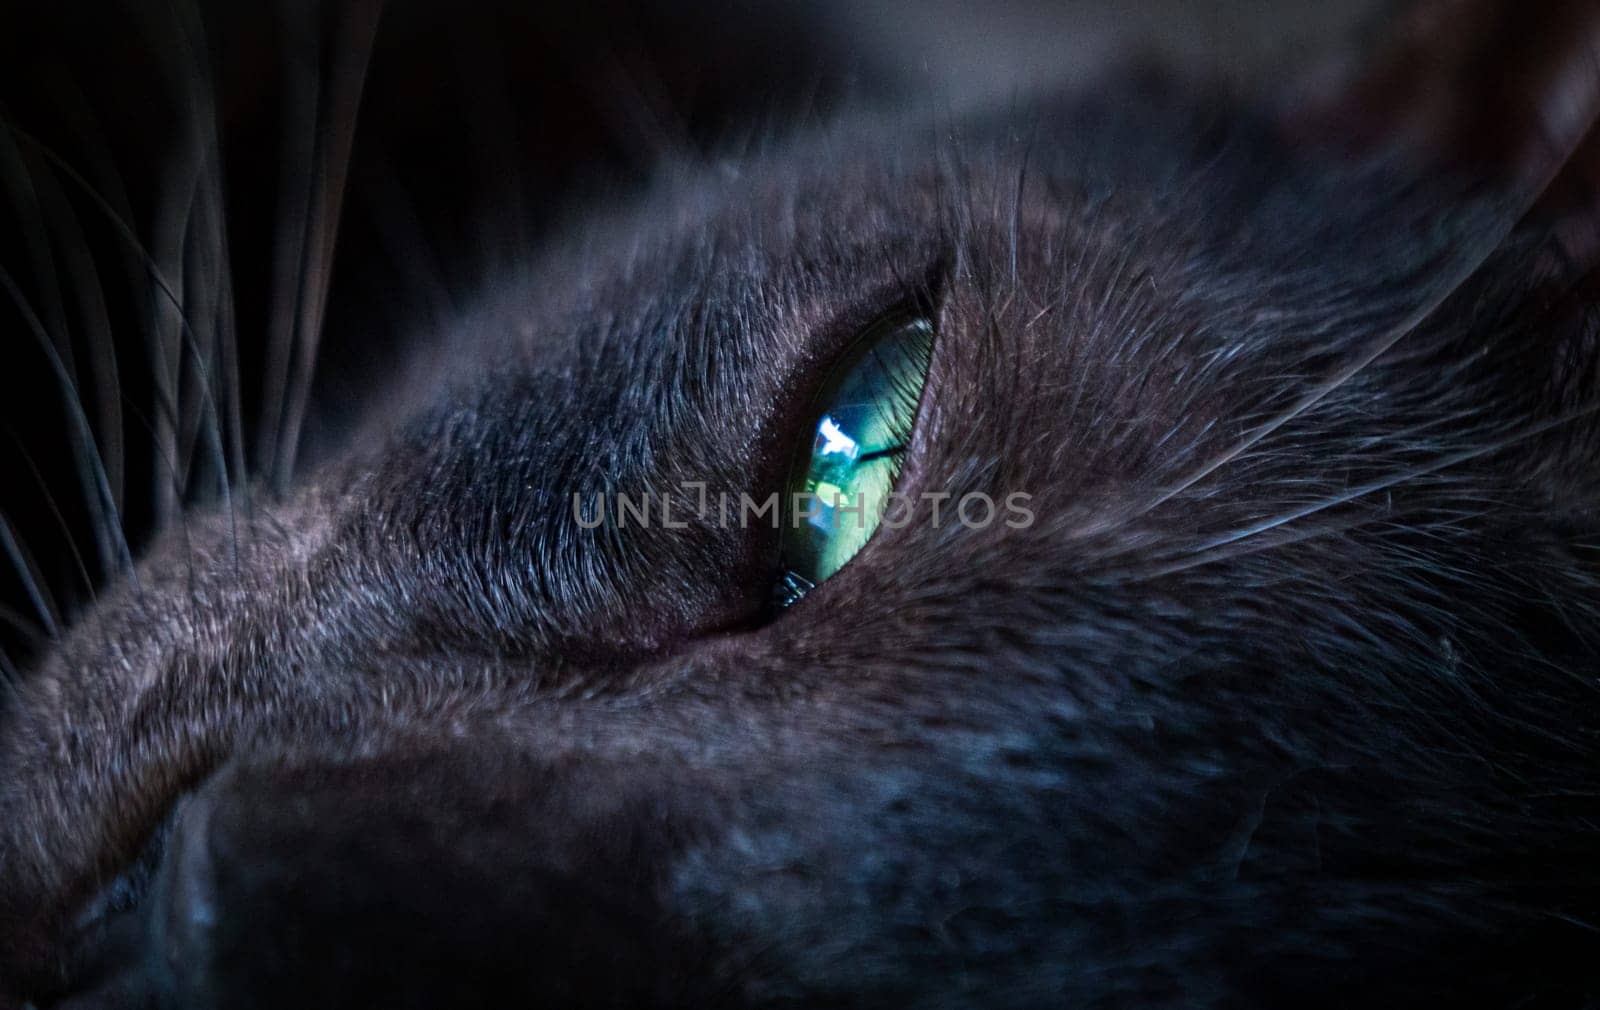 This close-up captures the intense gaze of a black cat, with its eye reflecting light in a nighttime setting, highlighting the texture of its fur.